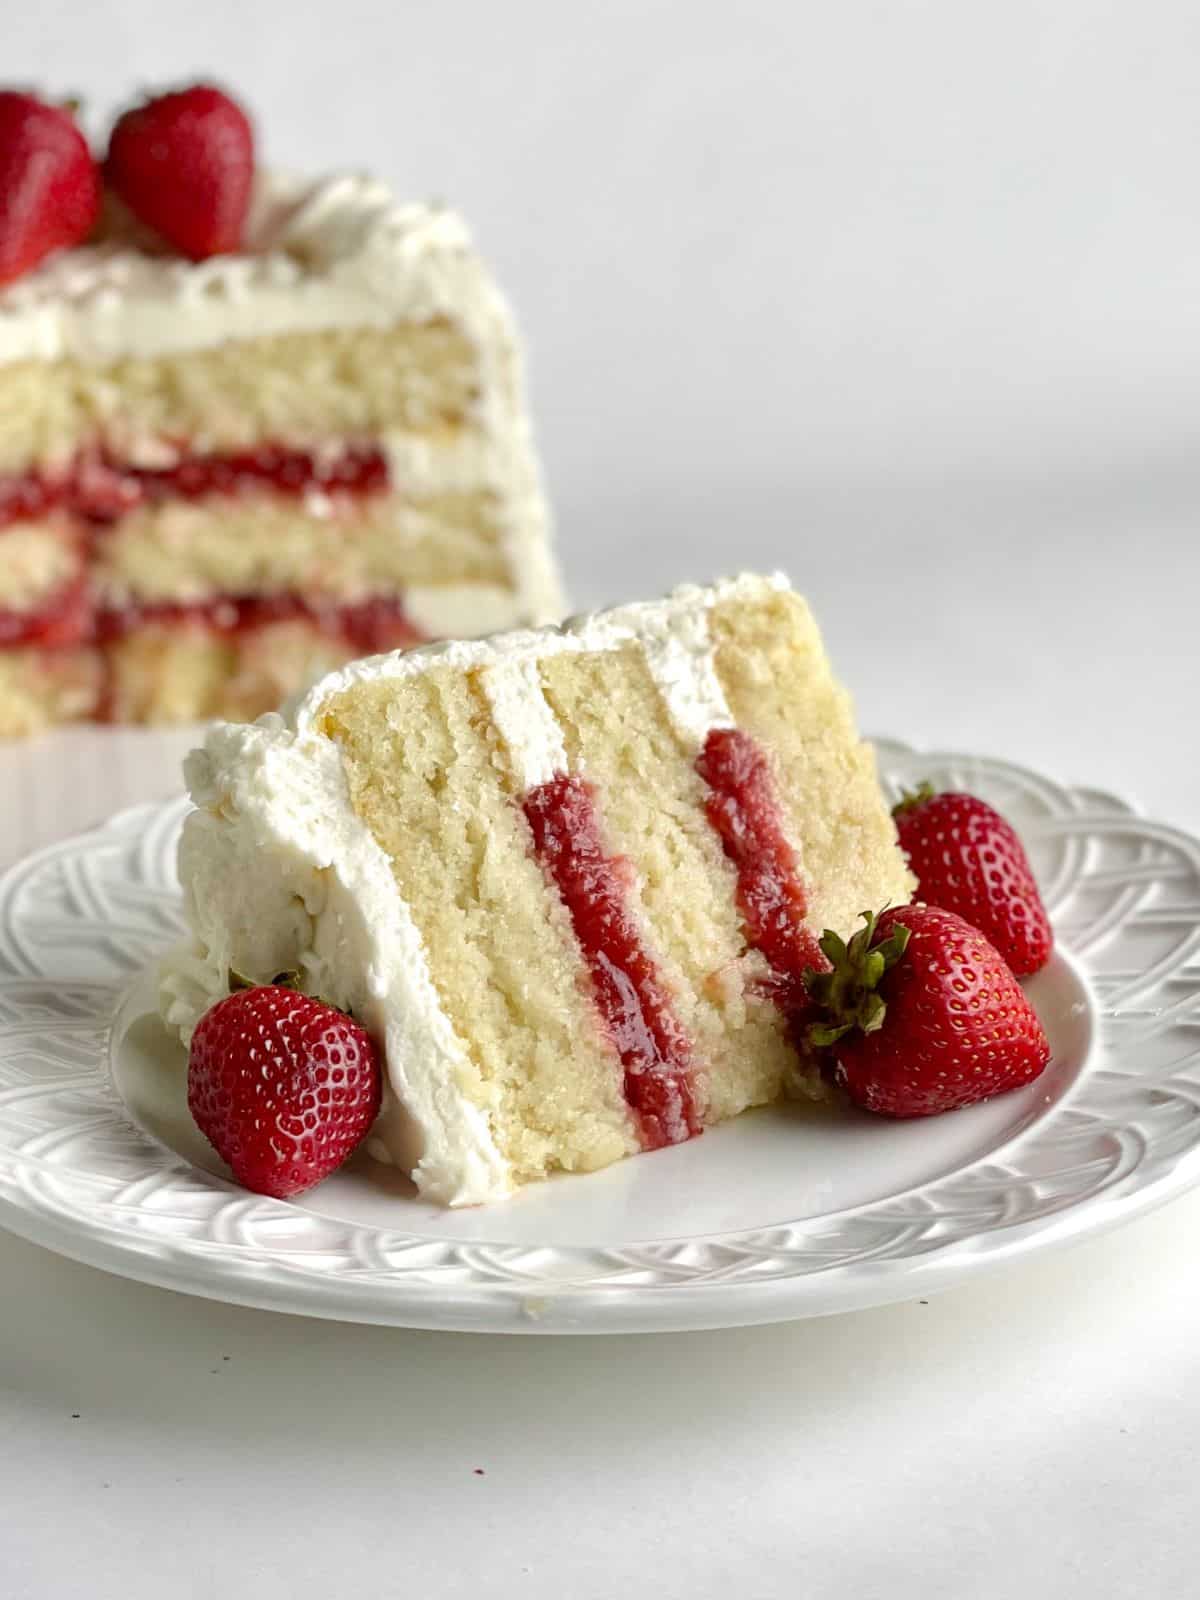 A slice of cake with Strawberry Cake Filling flavor and the rest of the cake in the background.